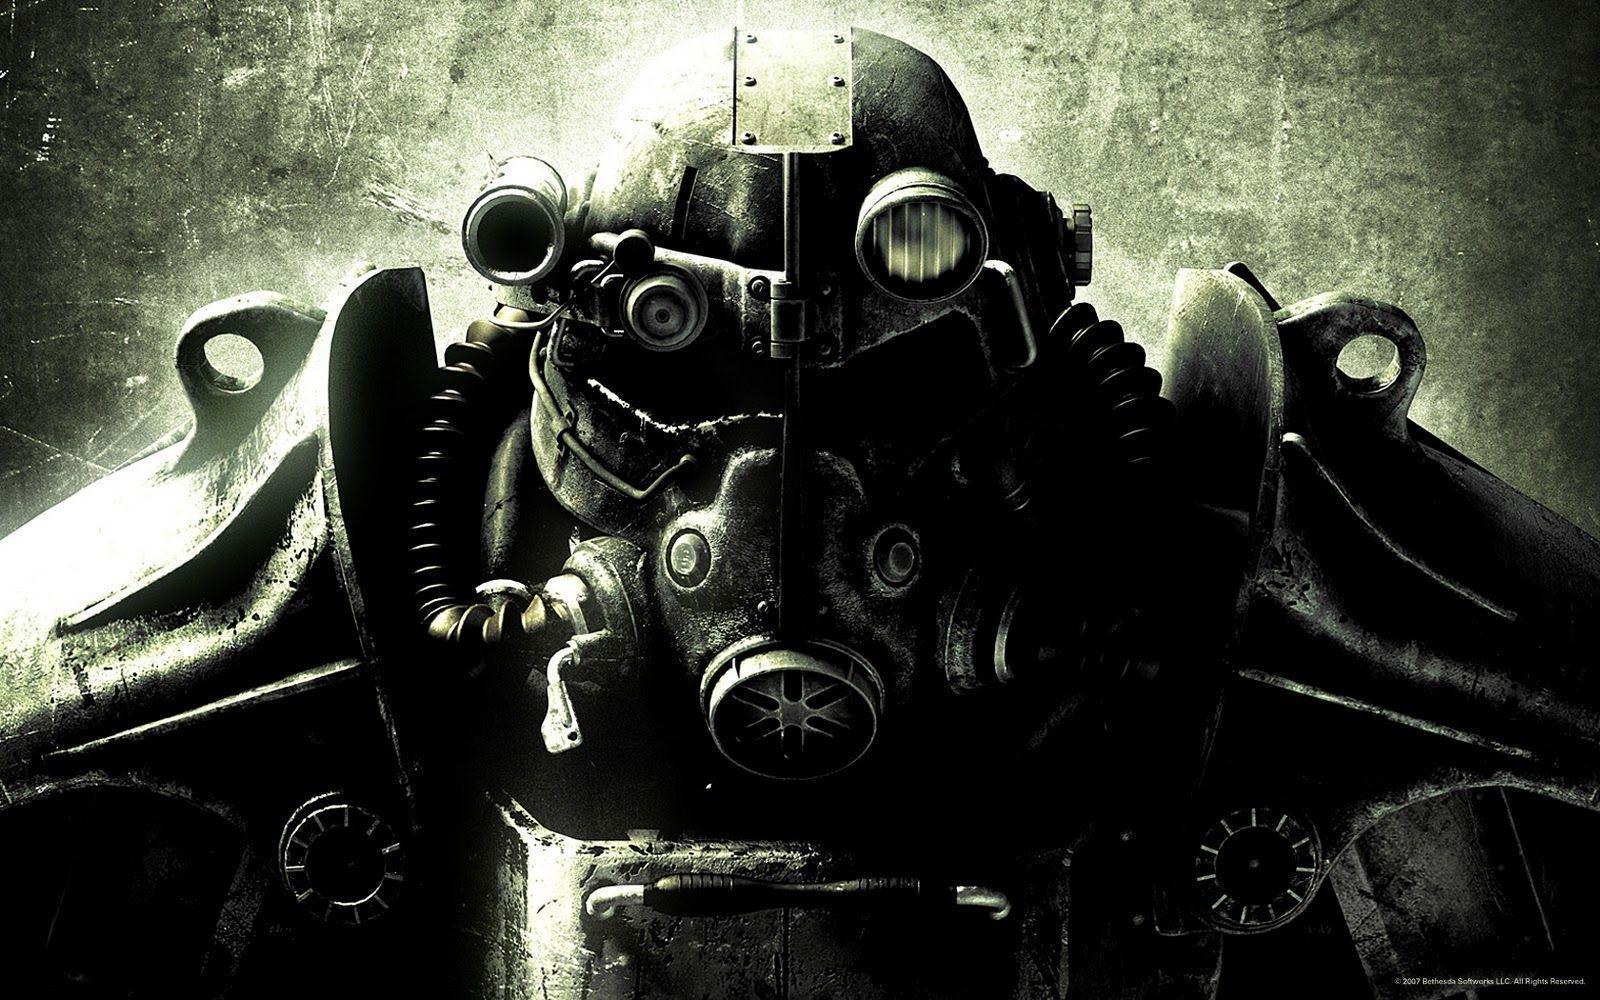 Wallpaper and other Cool Stuff!: 7th of December (Gasmask)